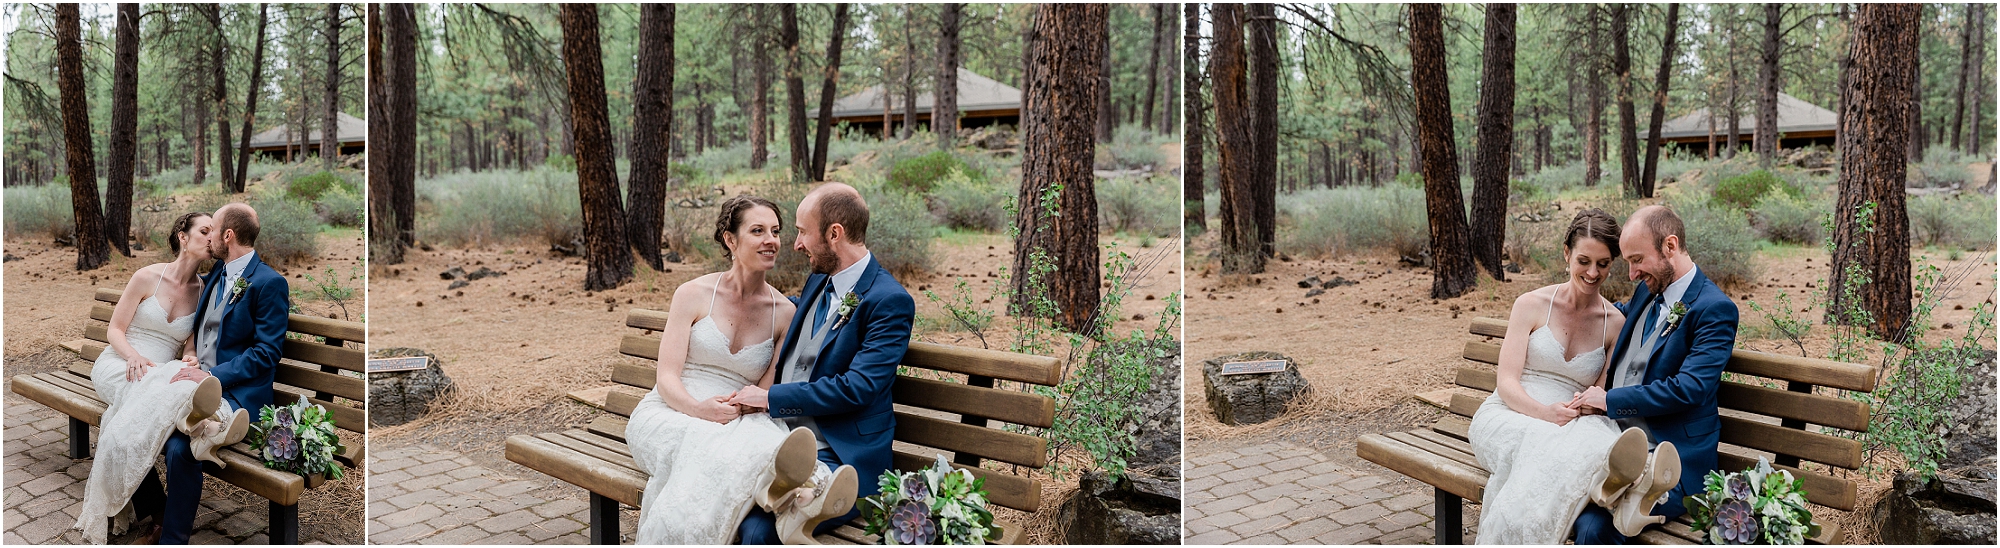 A wedding couple sits on a bench at the High Desert Museum wedding venue in Bend, OR. | Erica Swantek Photography